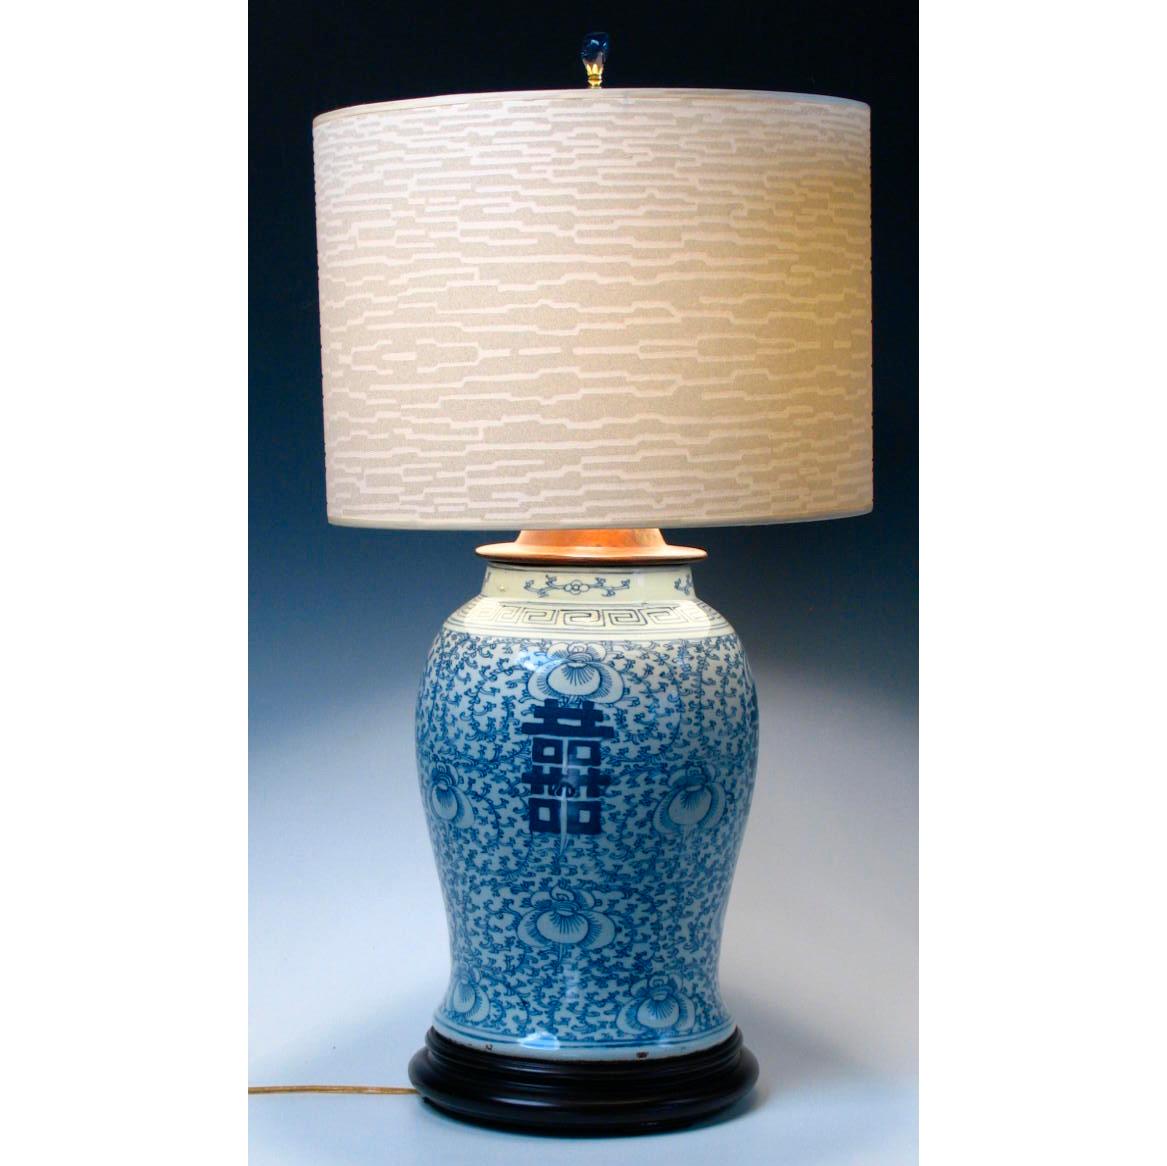 Chinese blue & white baluster vase fitted as a lamp. Ceramic vase with a cobalt blue under-glaze design of convolvulus bindweed, a symbol of love and marriage, with four bold hei (double happiness) characters, with key-fret pattern at the